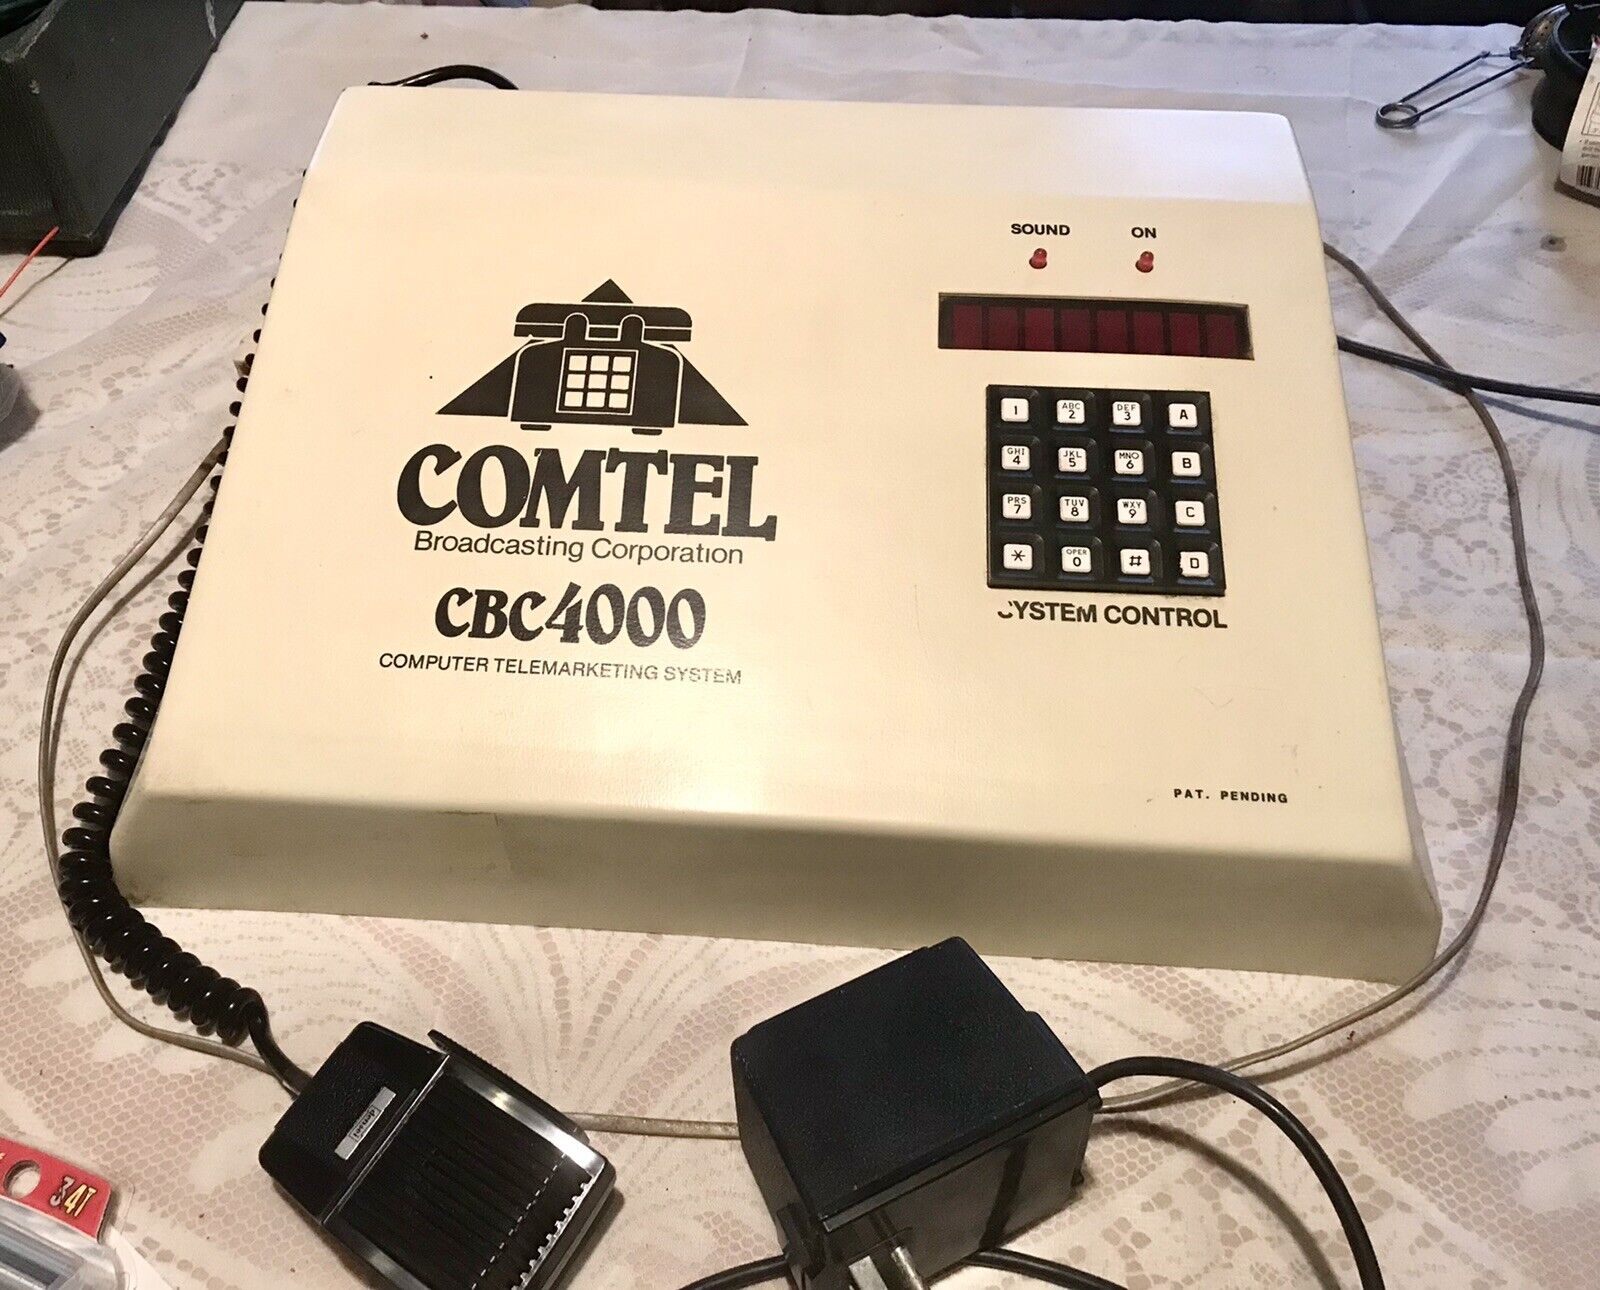 VTG Comtel CBC 4000 Computer Telemarketing System W/ Power Up